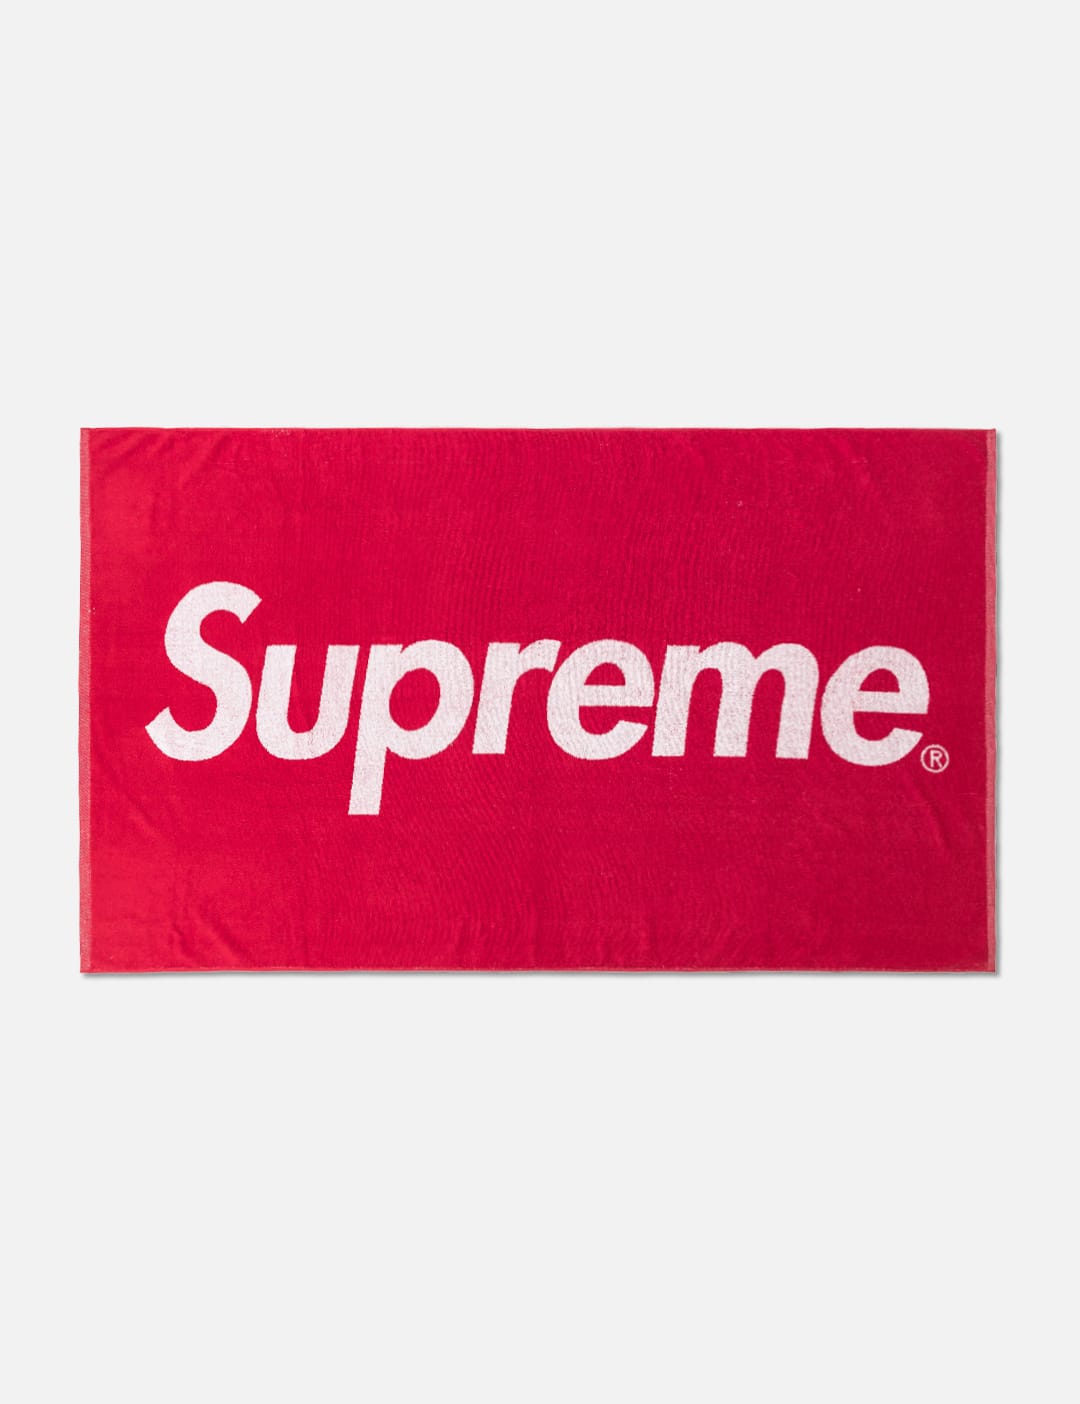 Supreme - SUPREME BEACH TOWEL | HBX - Globally Curated Fashion and  Lifestyle by Hypebeast